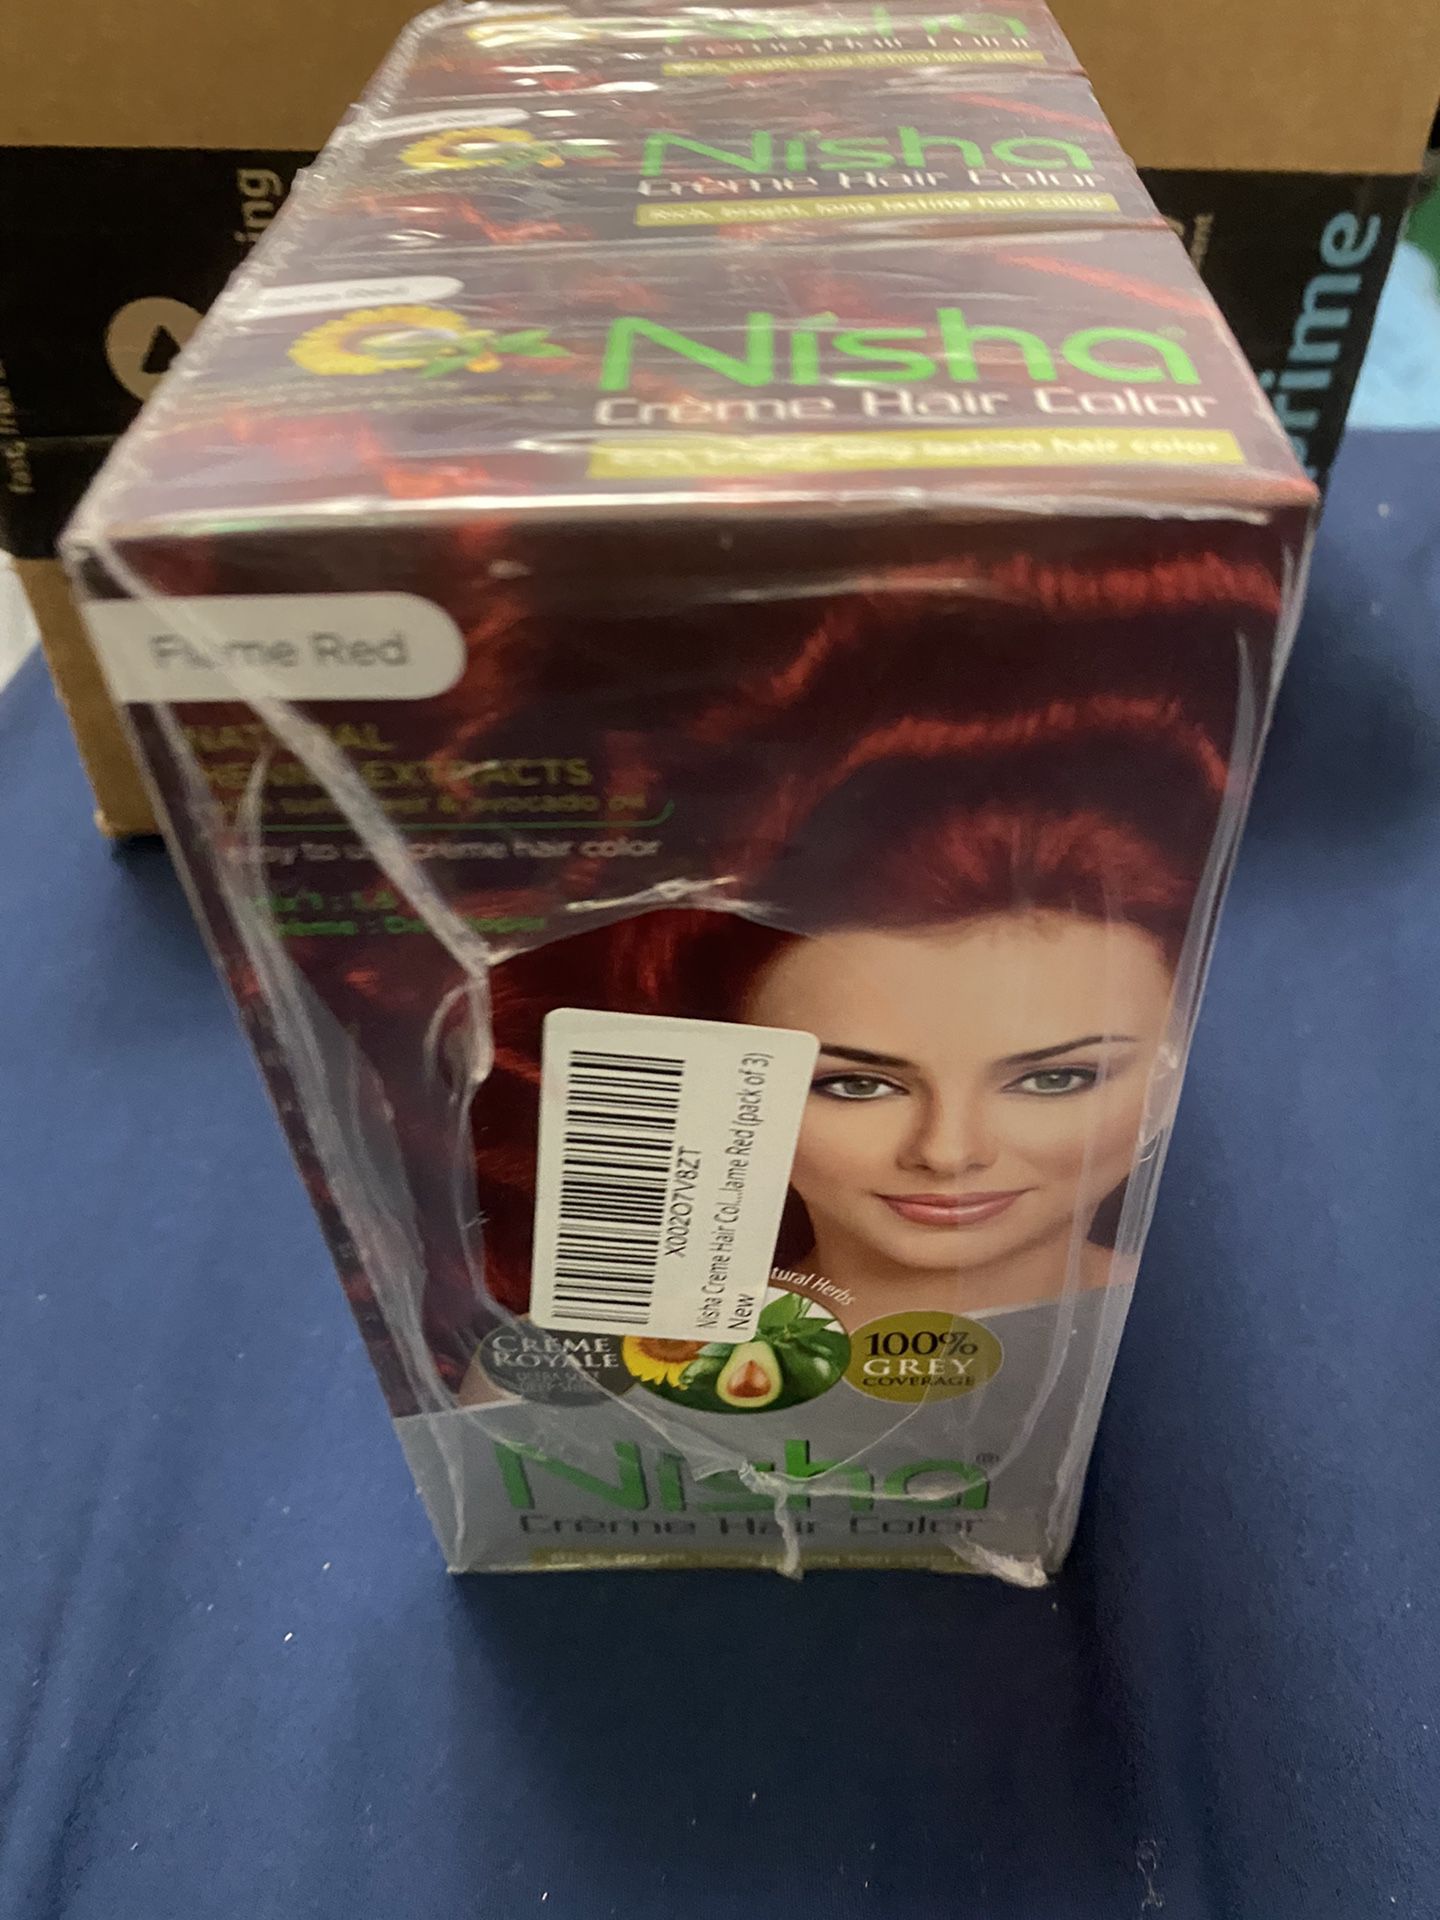 3 Boxes Of Nisha Crème Hair Color - Flame Red